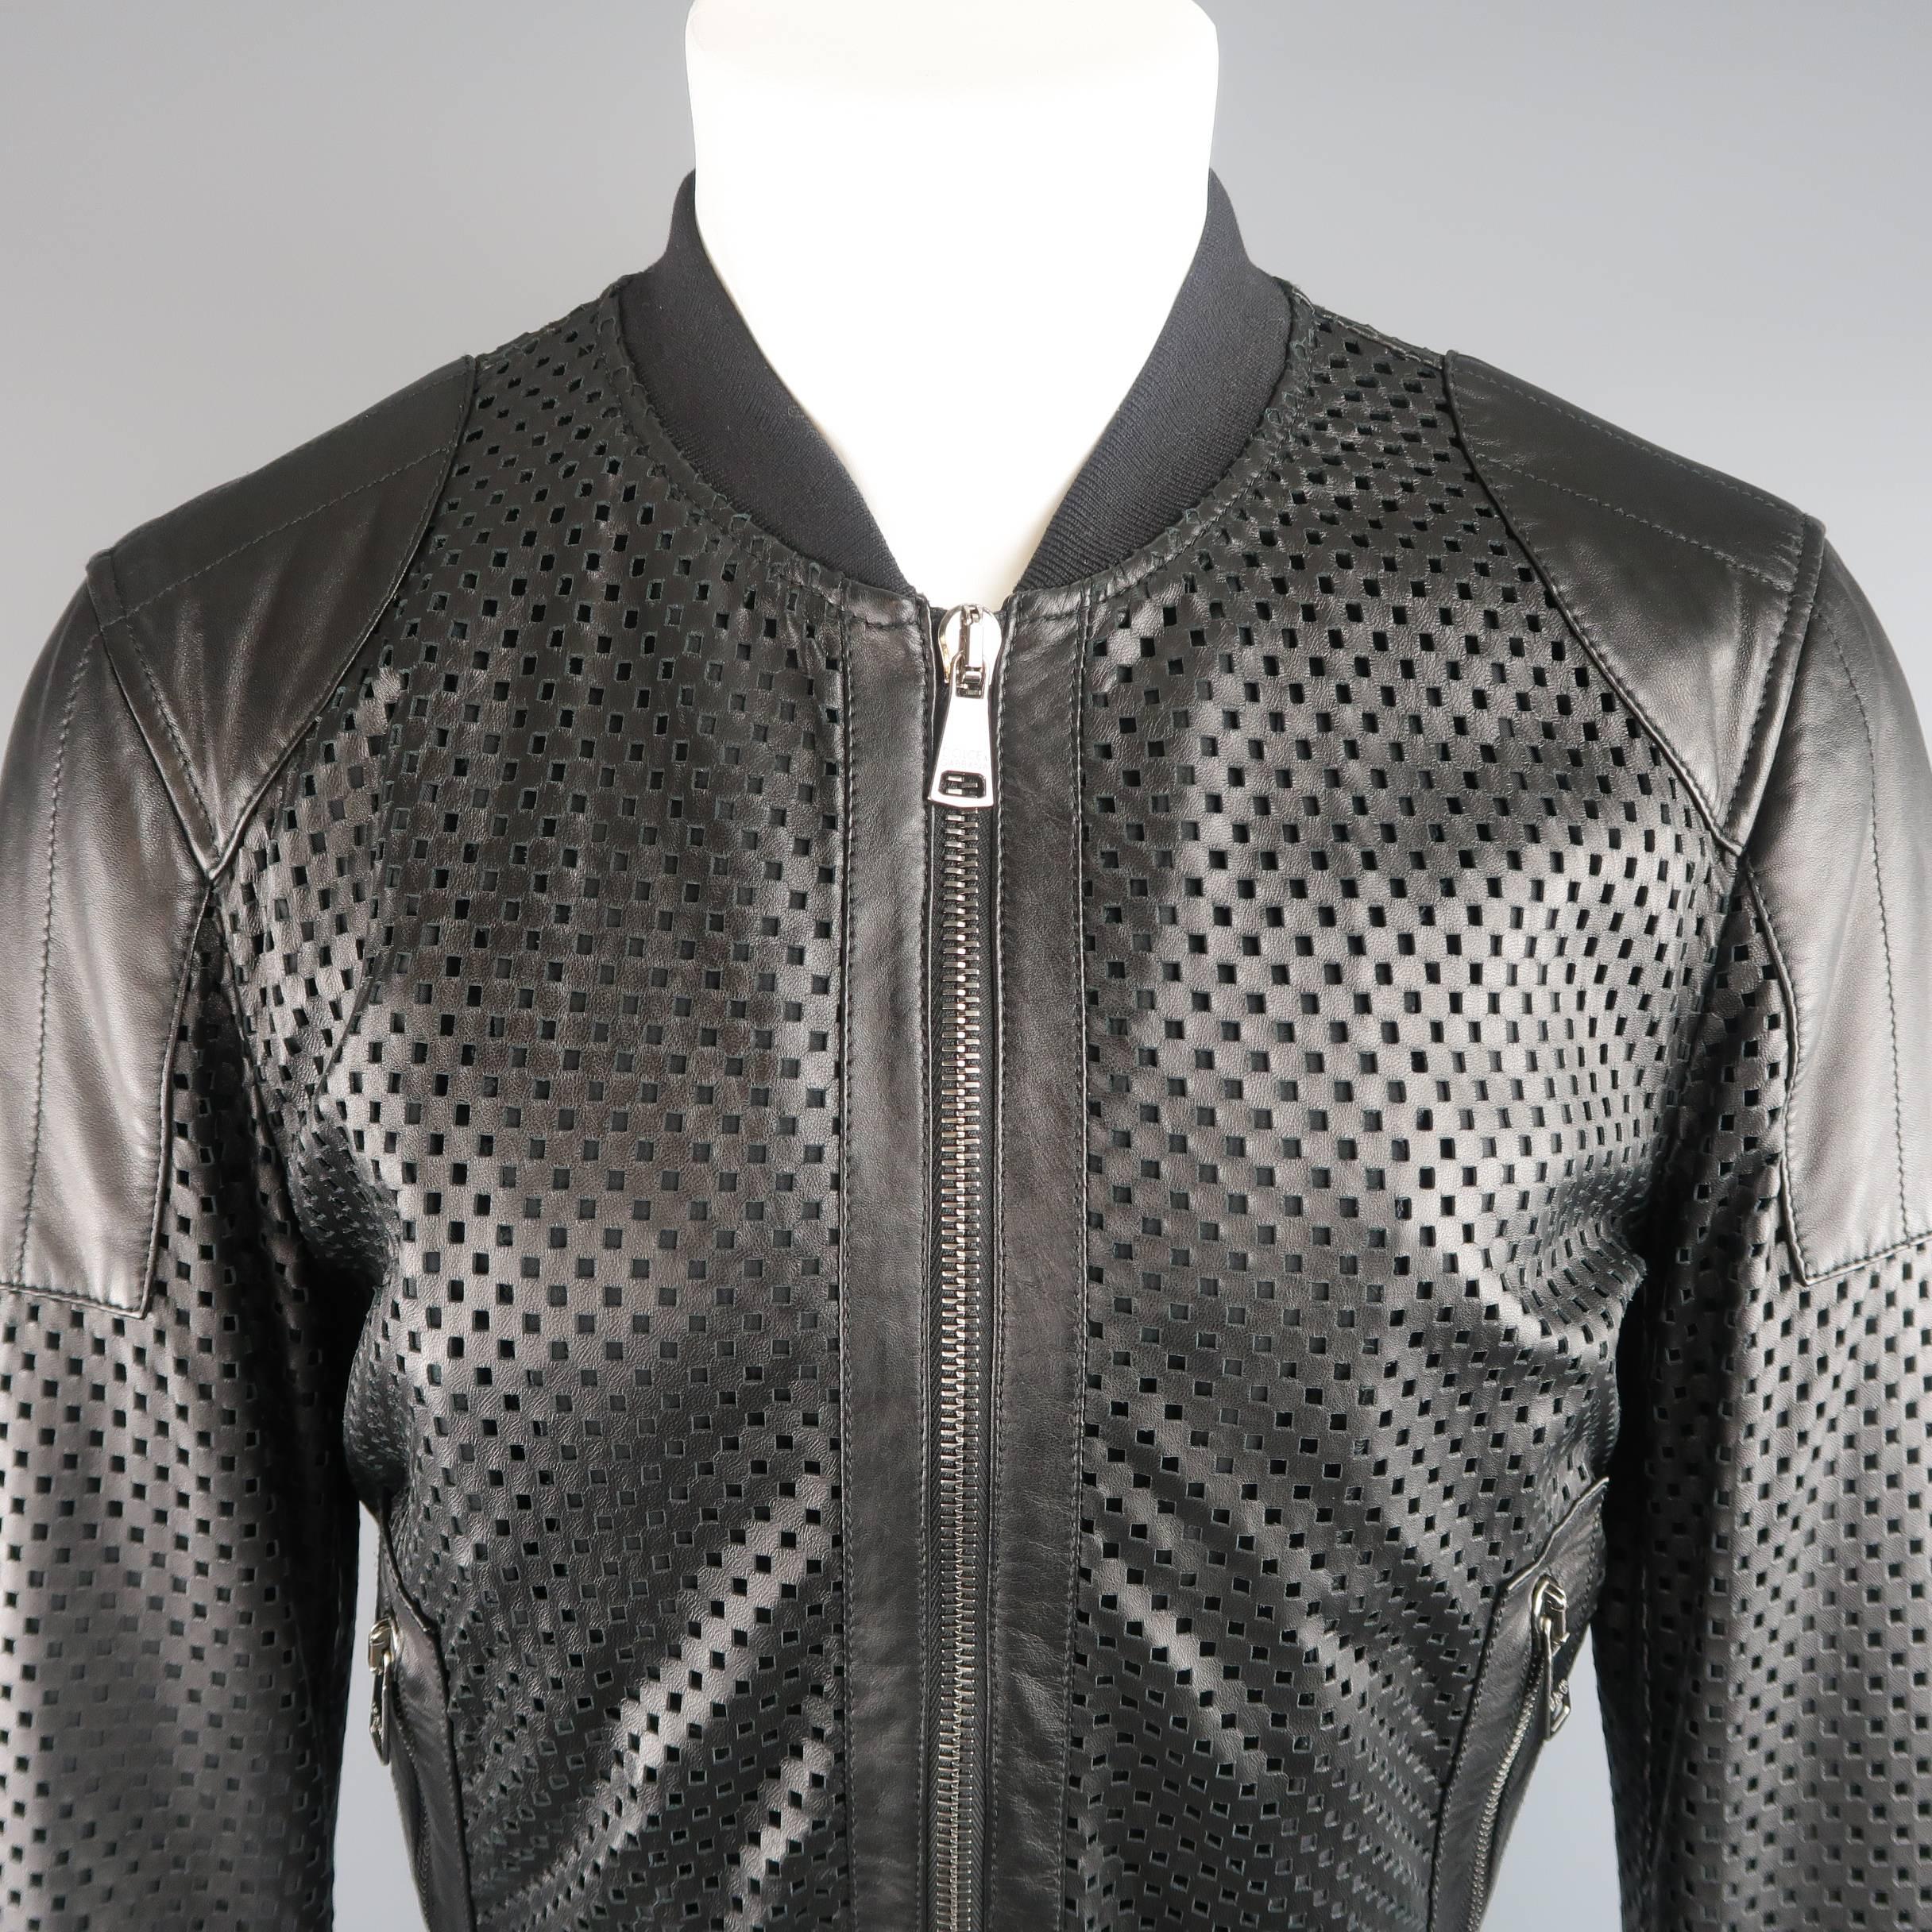 DOLCE & GABBANA baseball jacket comes in a checkered pattern perforated leather with a ribbed baseball collar, zip pockets, and shoulder pad detail. Minor wear including a couple tears shown in detail shots. As-is. Made in Italy.
 
Fair